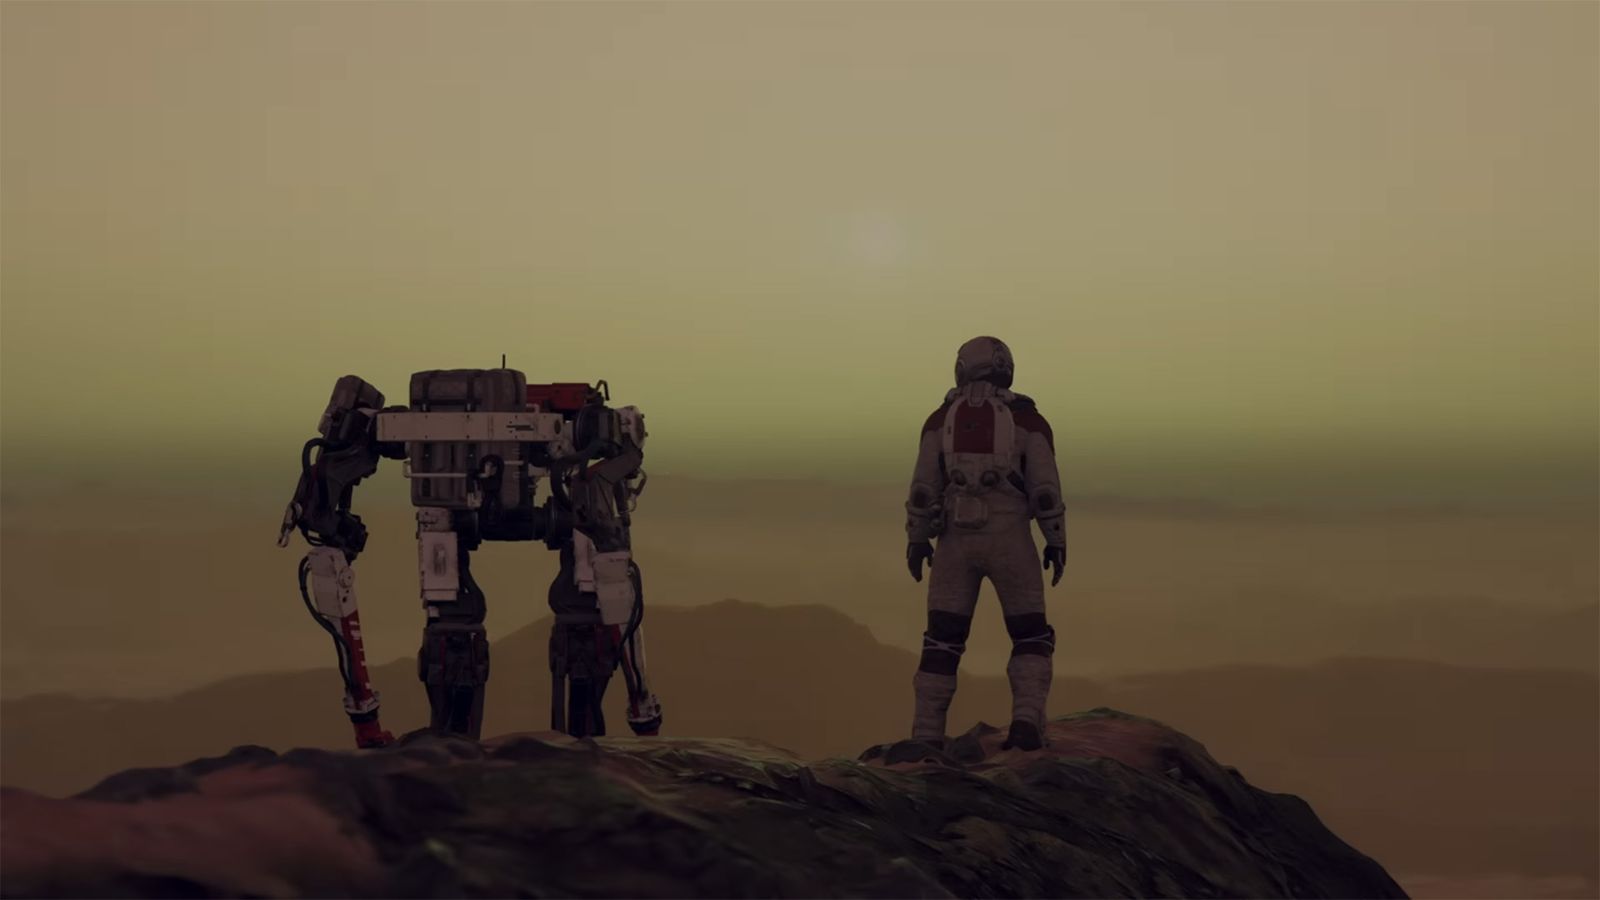 An explorer looks out upon a planet with a mech robot companion